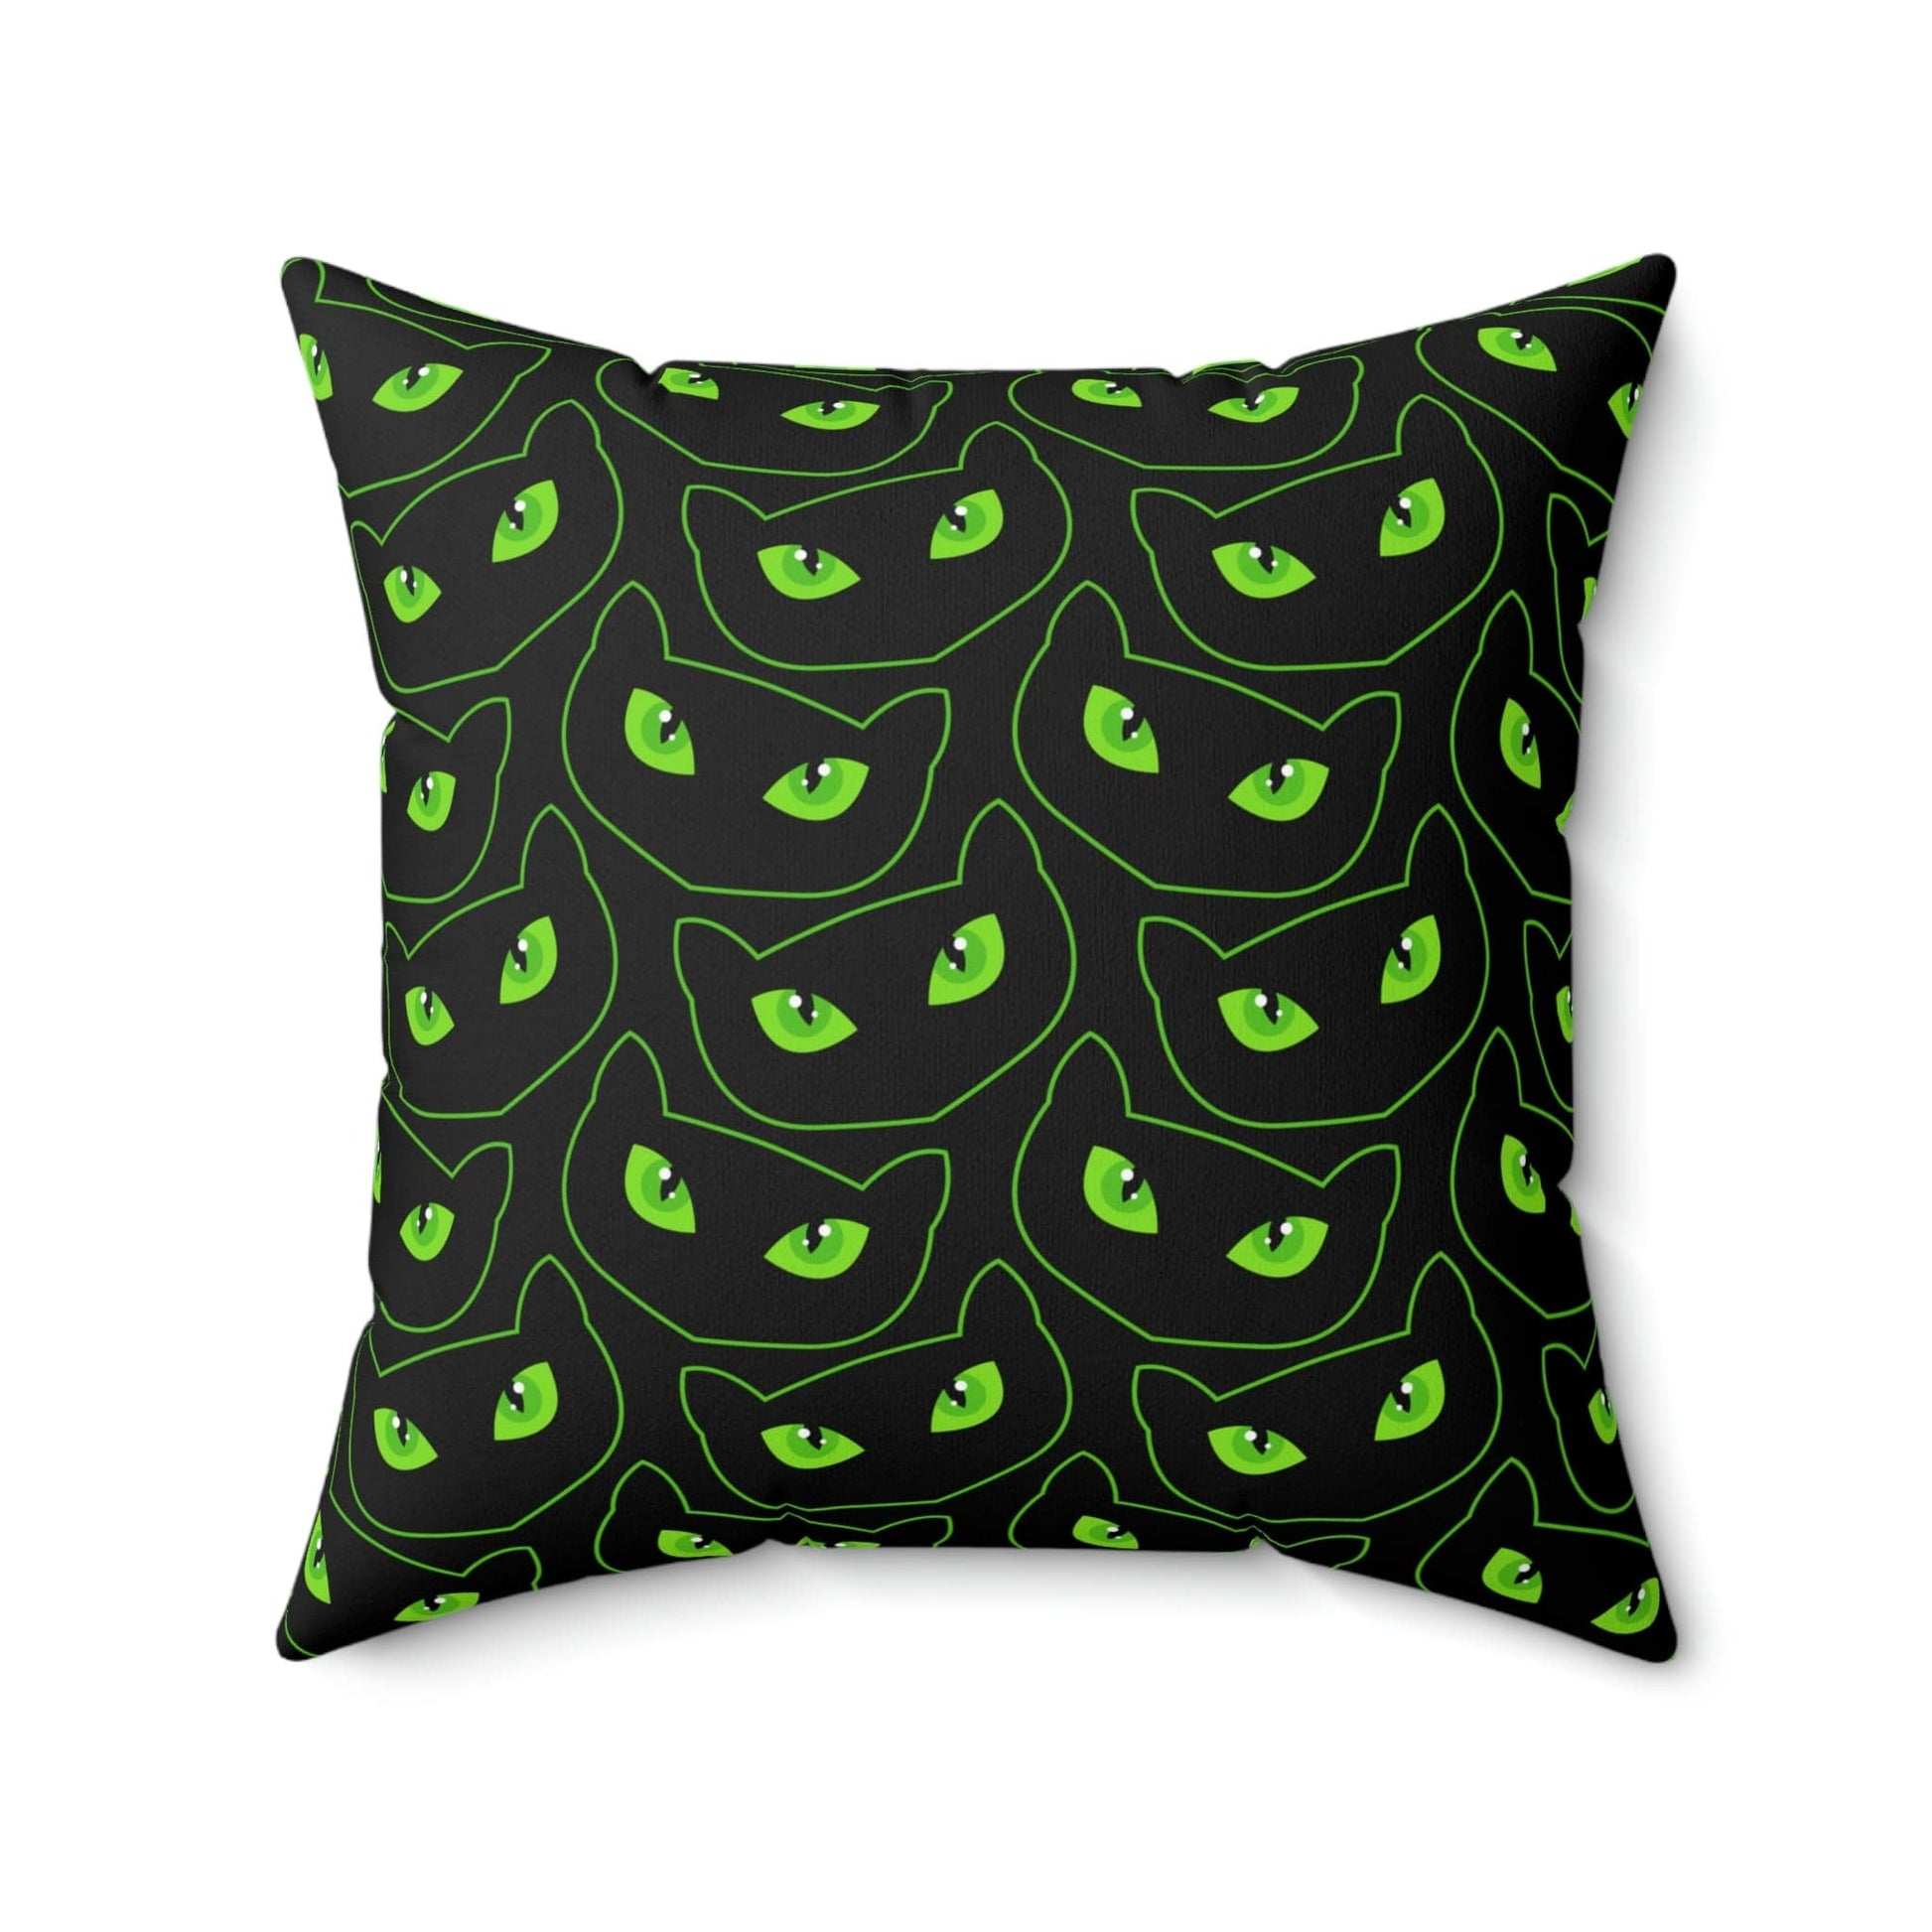 Kate McEnroe New York Halloween Pillow Cover, Spooky Cat Eyes Pillow Case Throw Pillow Covers 20" × 20" 3549431918